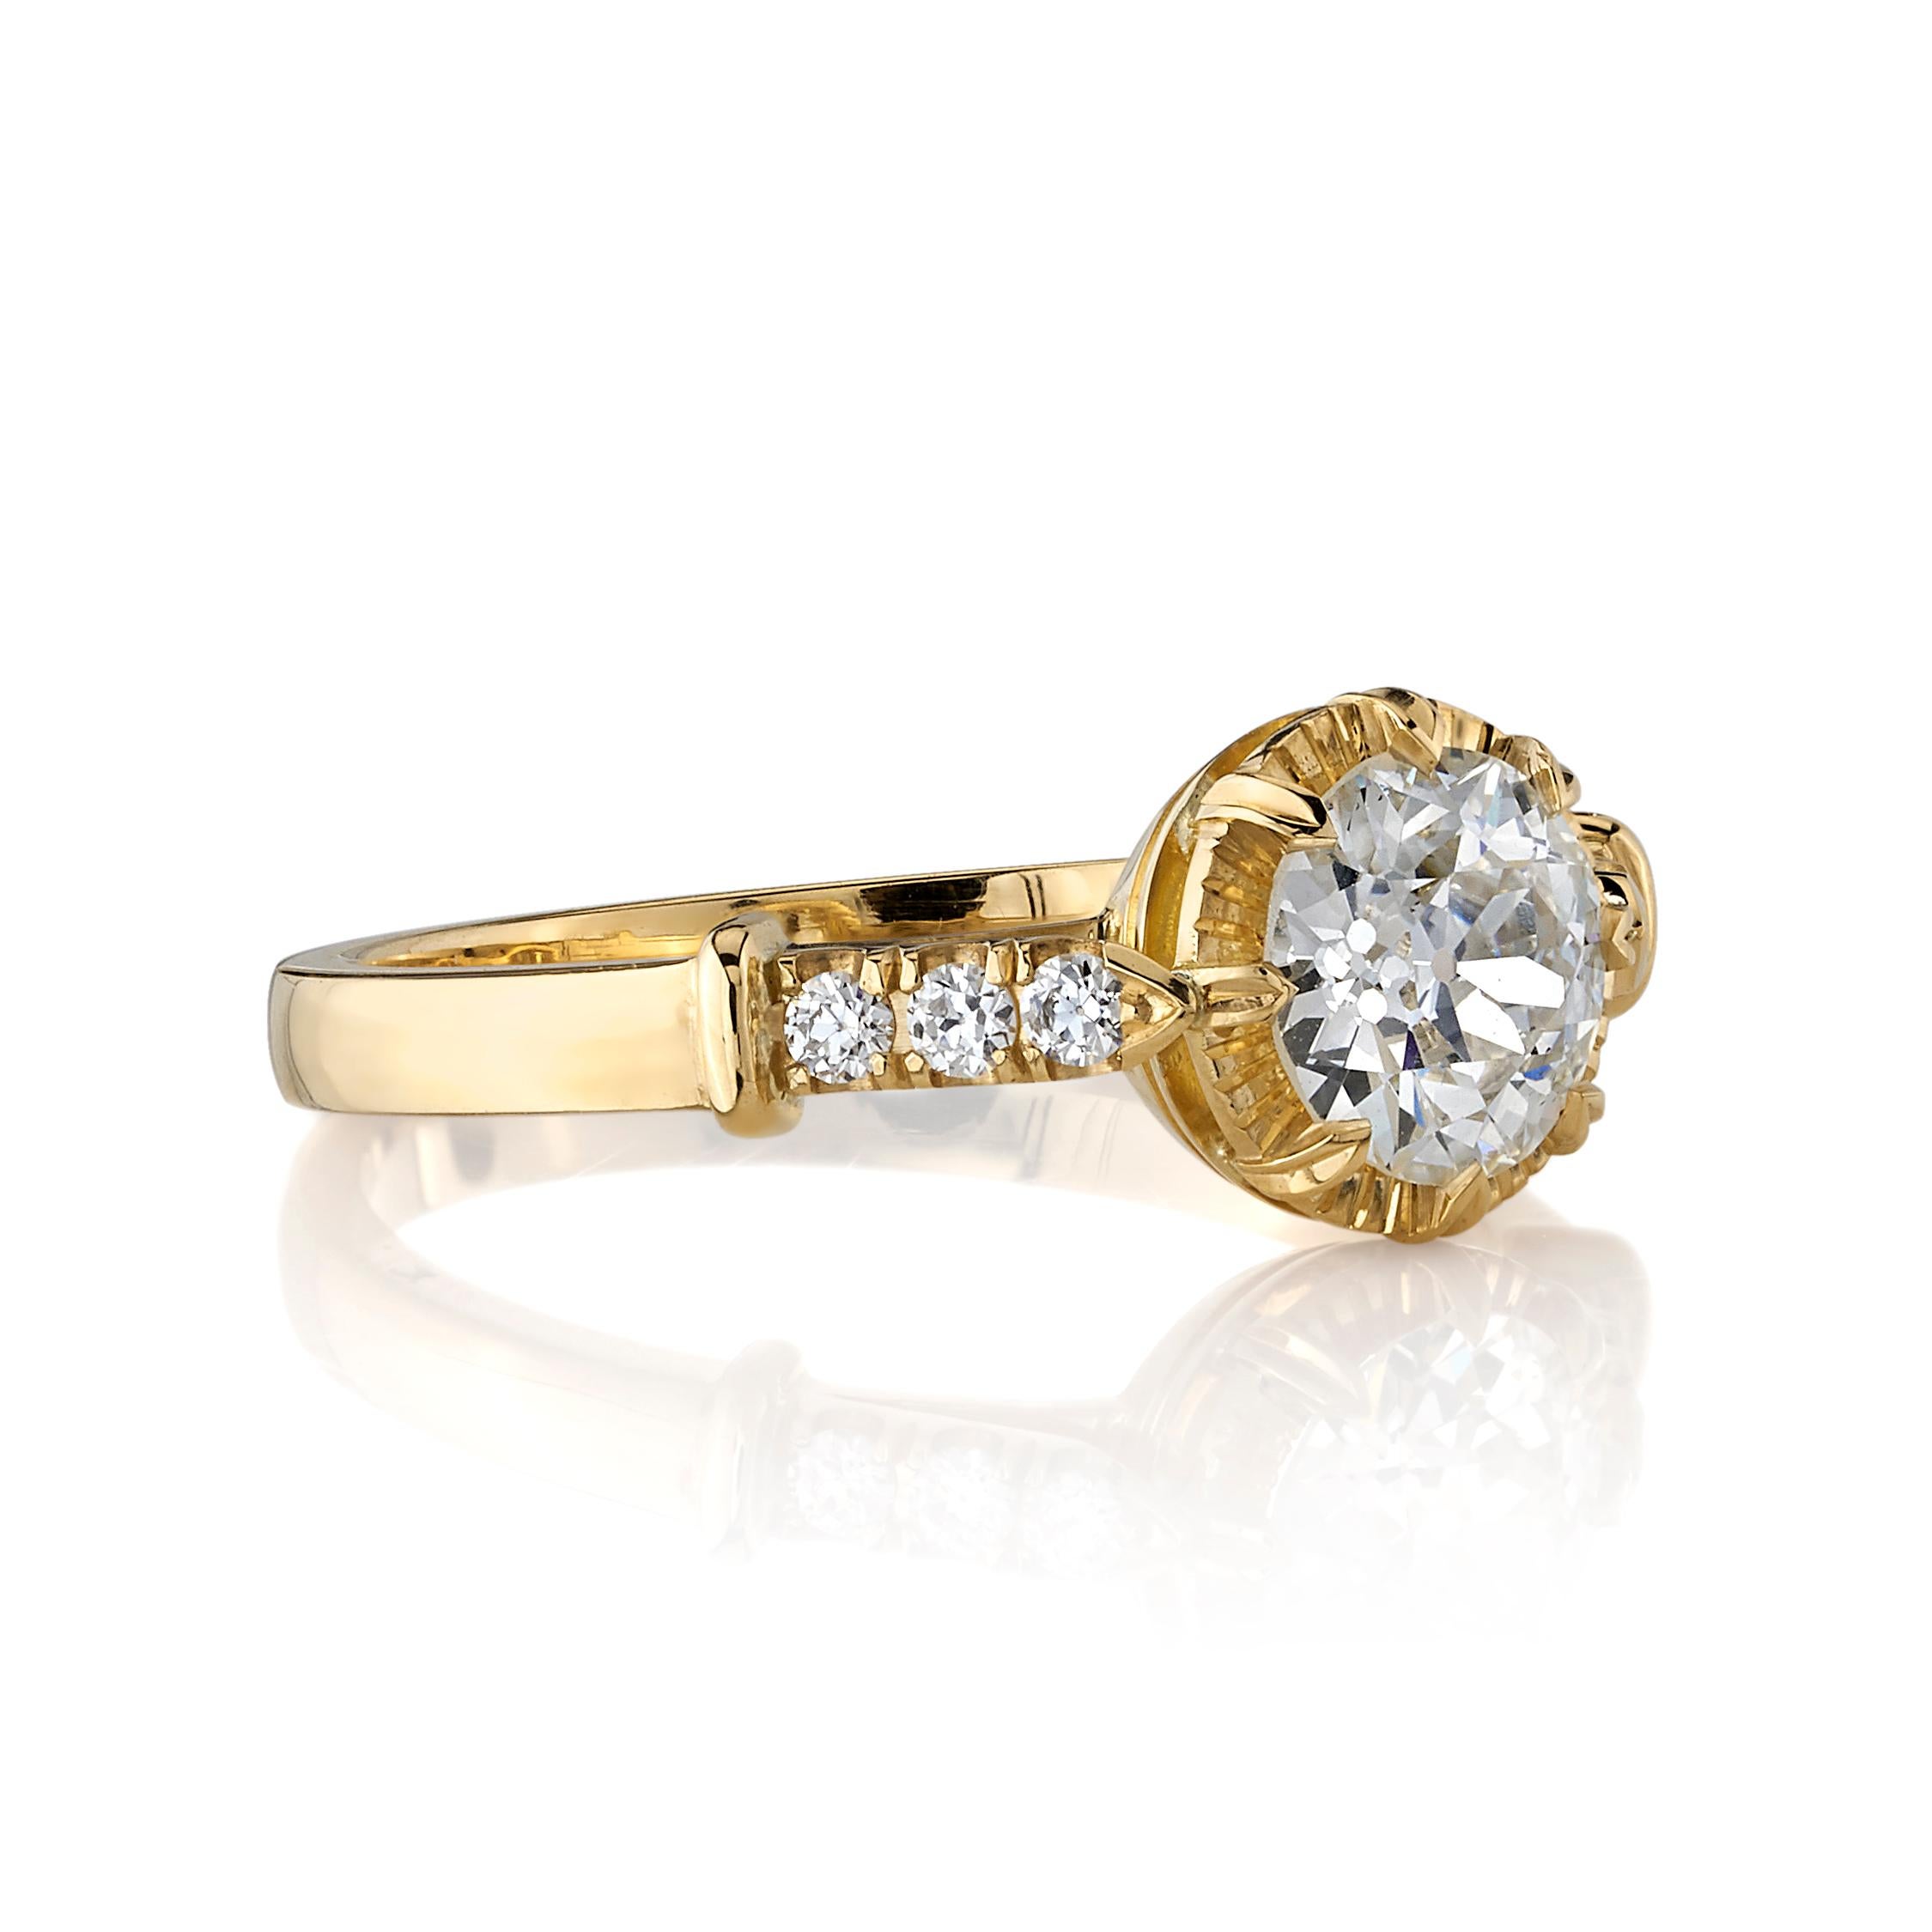 0.85ct J/SI2 GIA certified old European cut diamond with 0.11ctw old European cut accent diamonds set in a handcrafted 18K yellow gold mounting.

Ring is currently a size 6 and can be sized to fit.